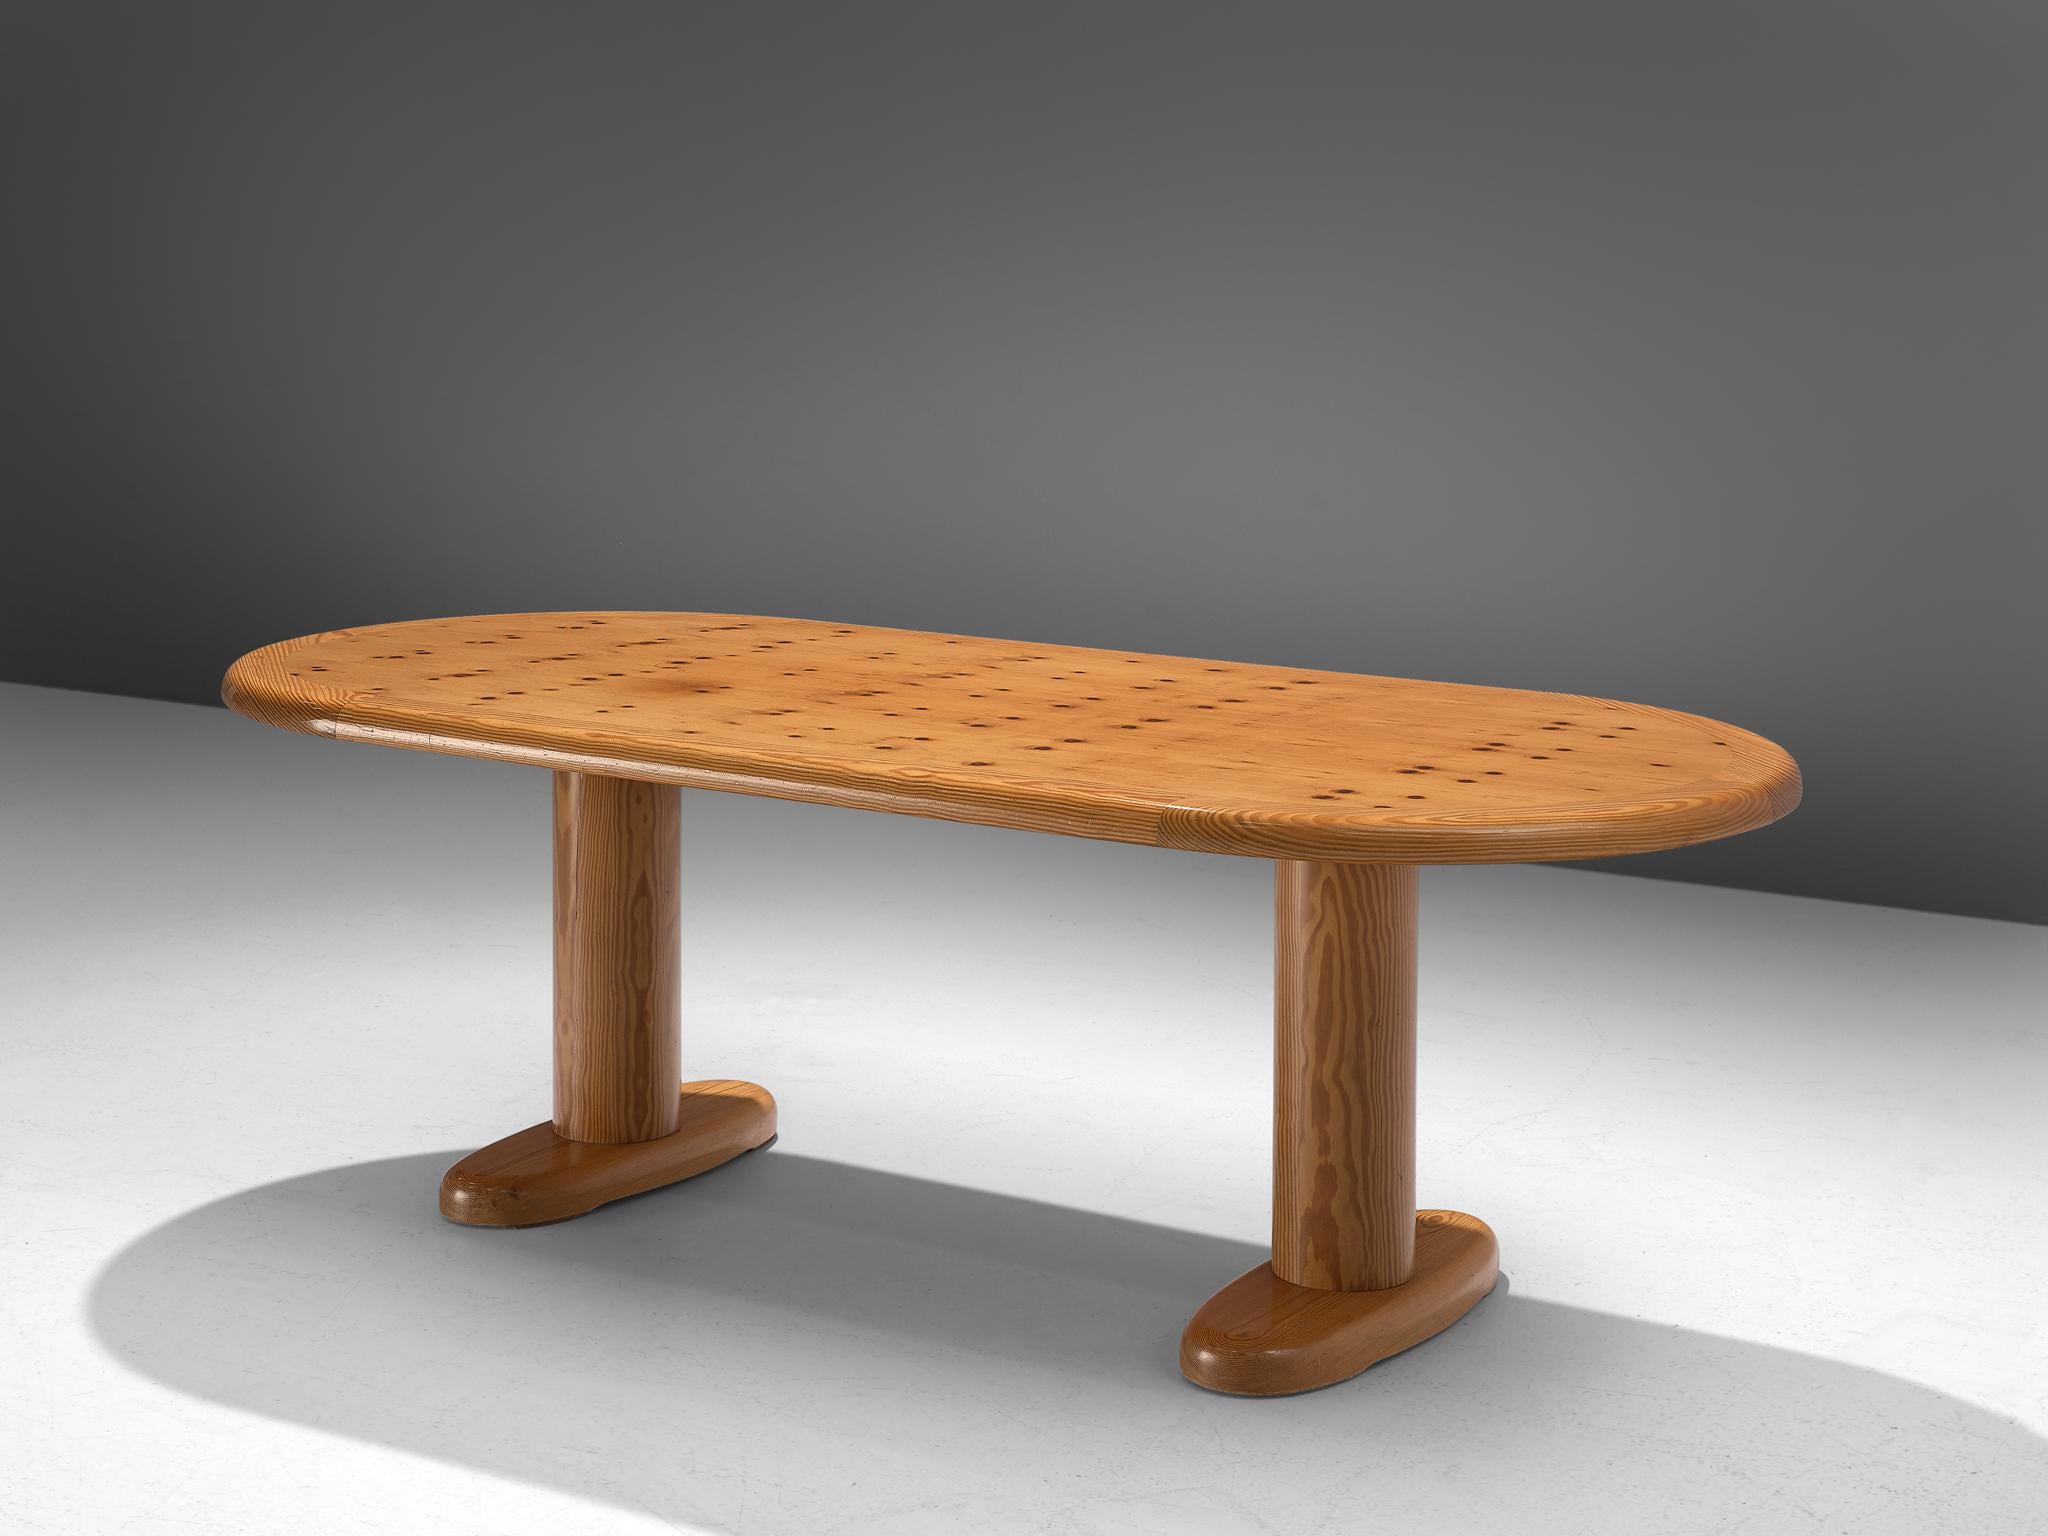 Rainer Daumiller for Hirtshals Savvaerk, dining table, pine, Denmark, 1970s.

Robust and simplistic dining or conference table in solid pine, designed by Rainer Daumiller. A modest design with a oval shaped tabletop with rounded edges and inlayed